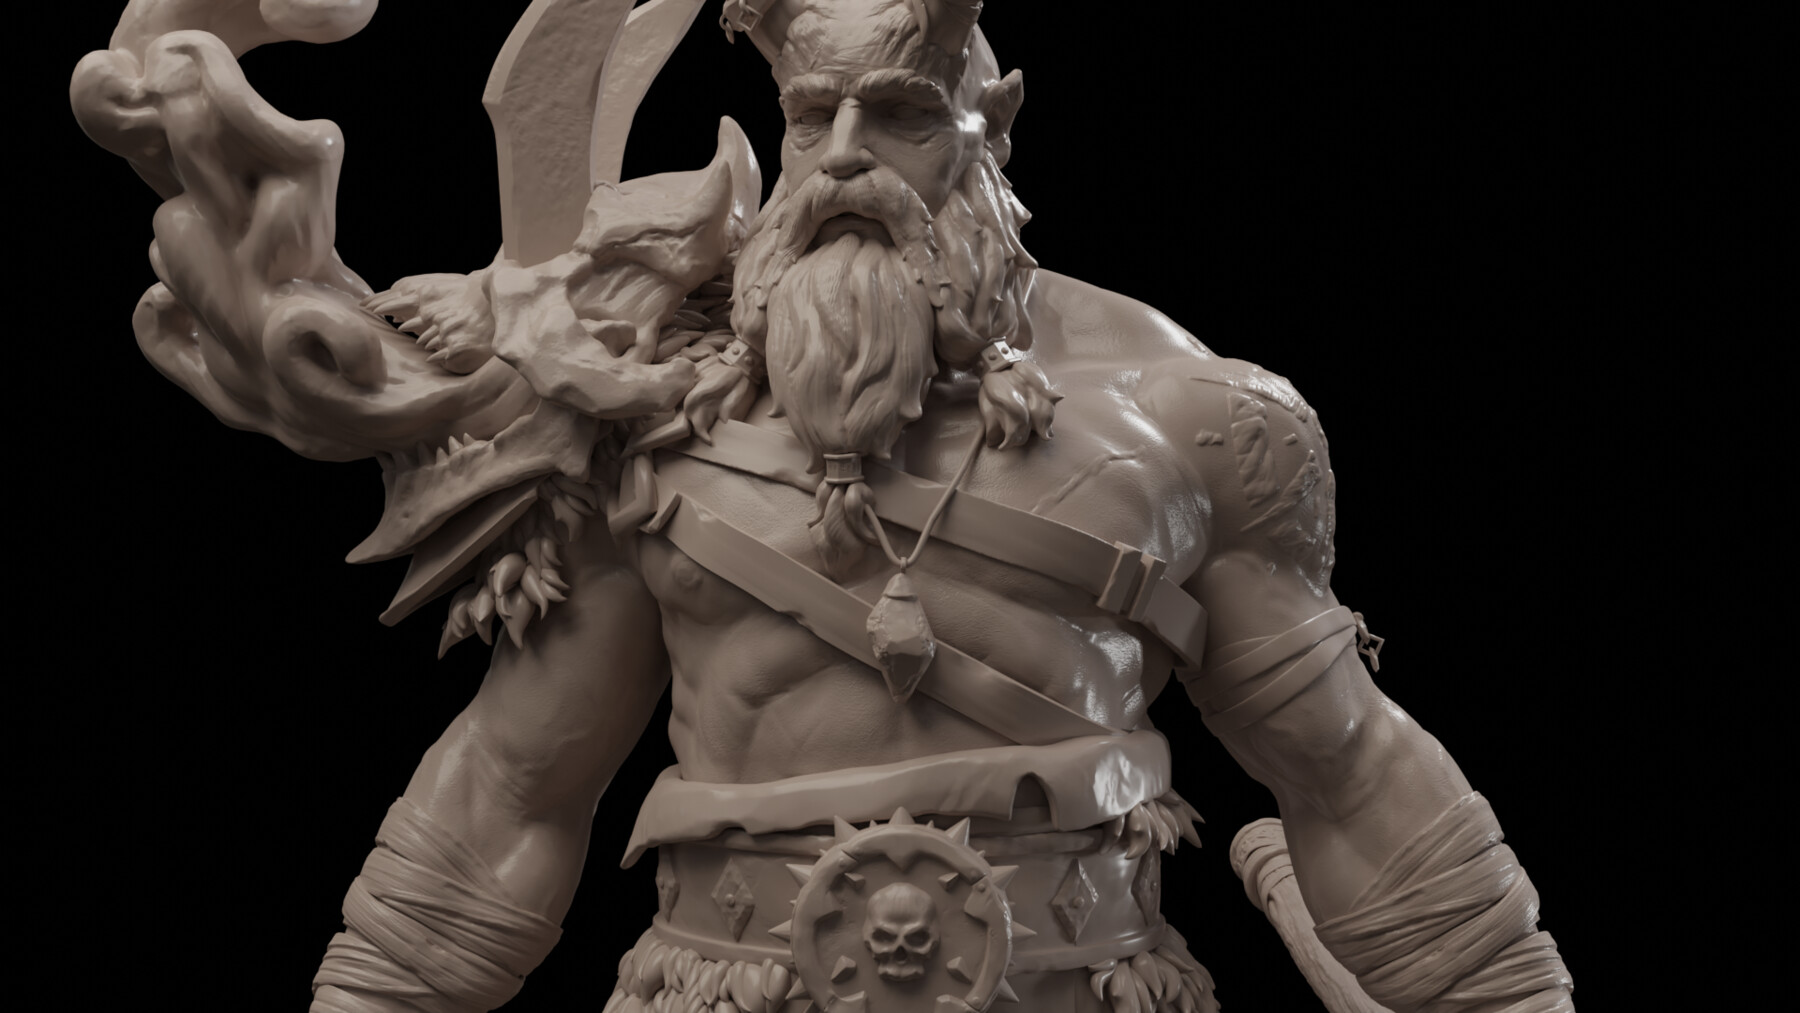 zbrush character creation course